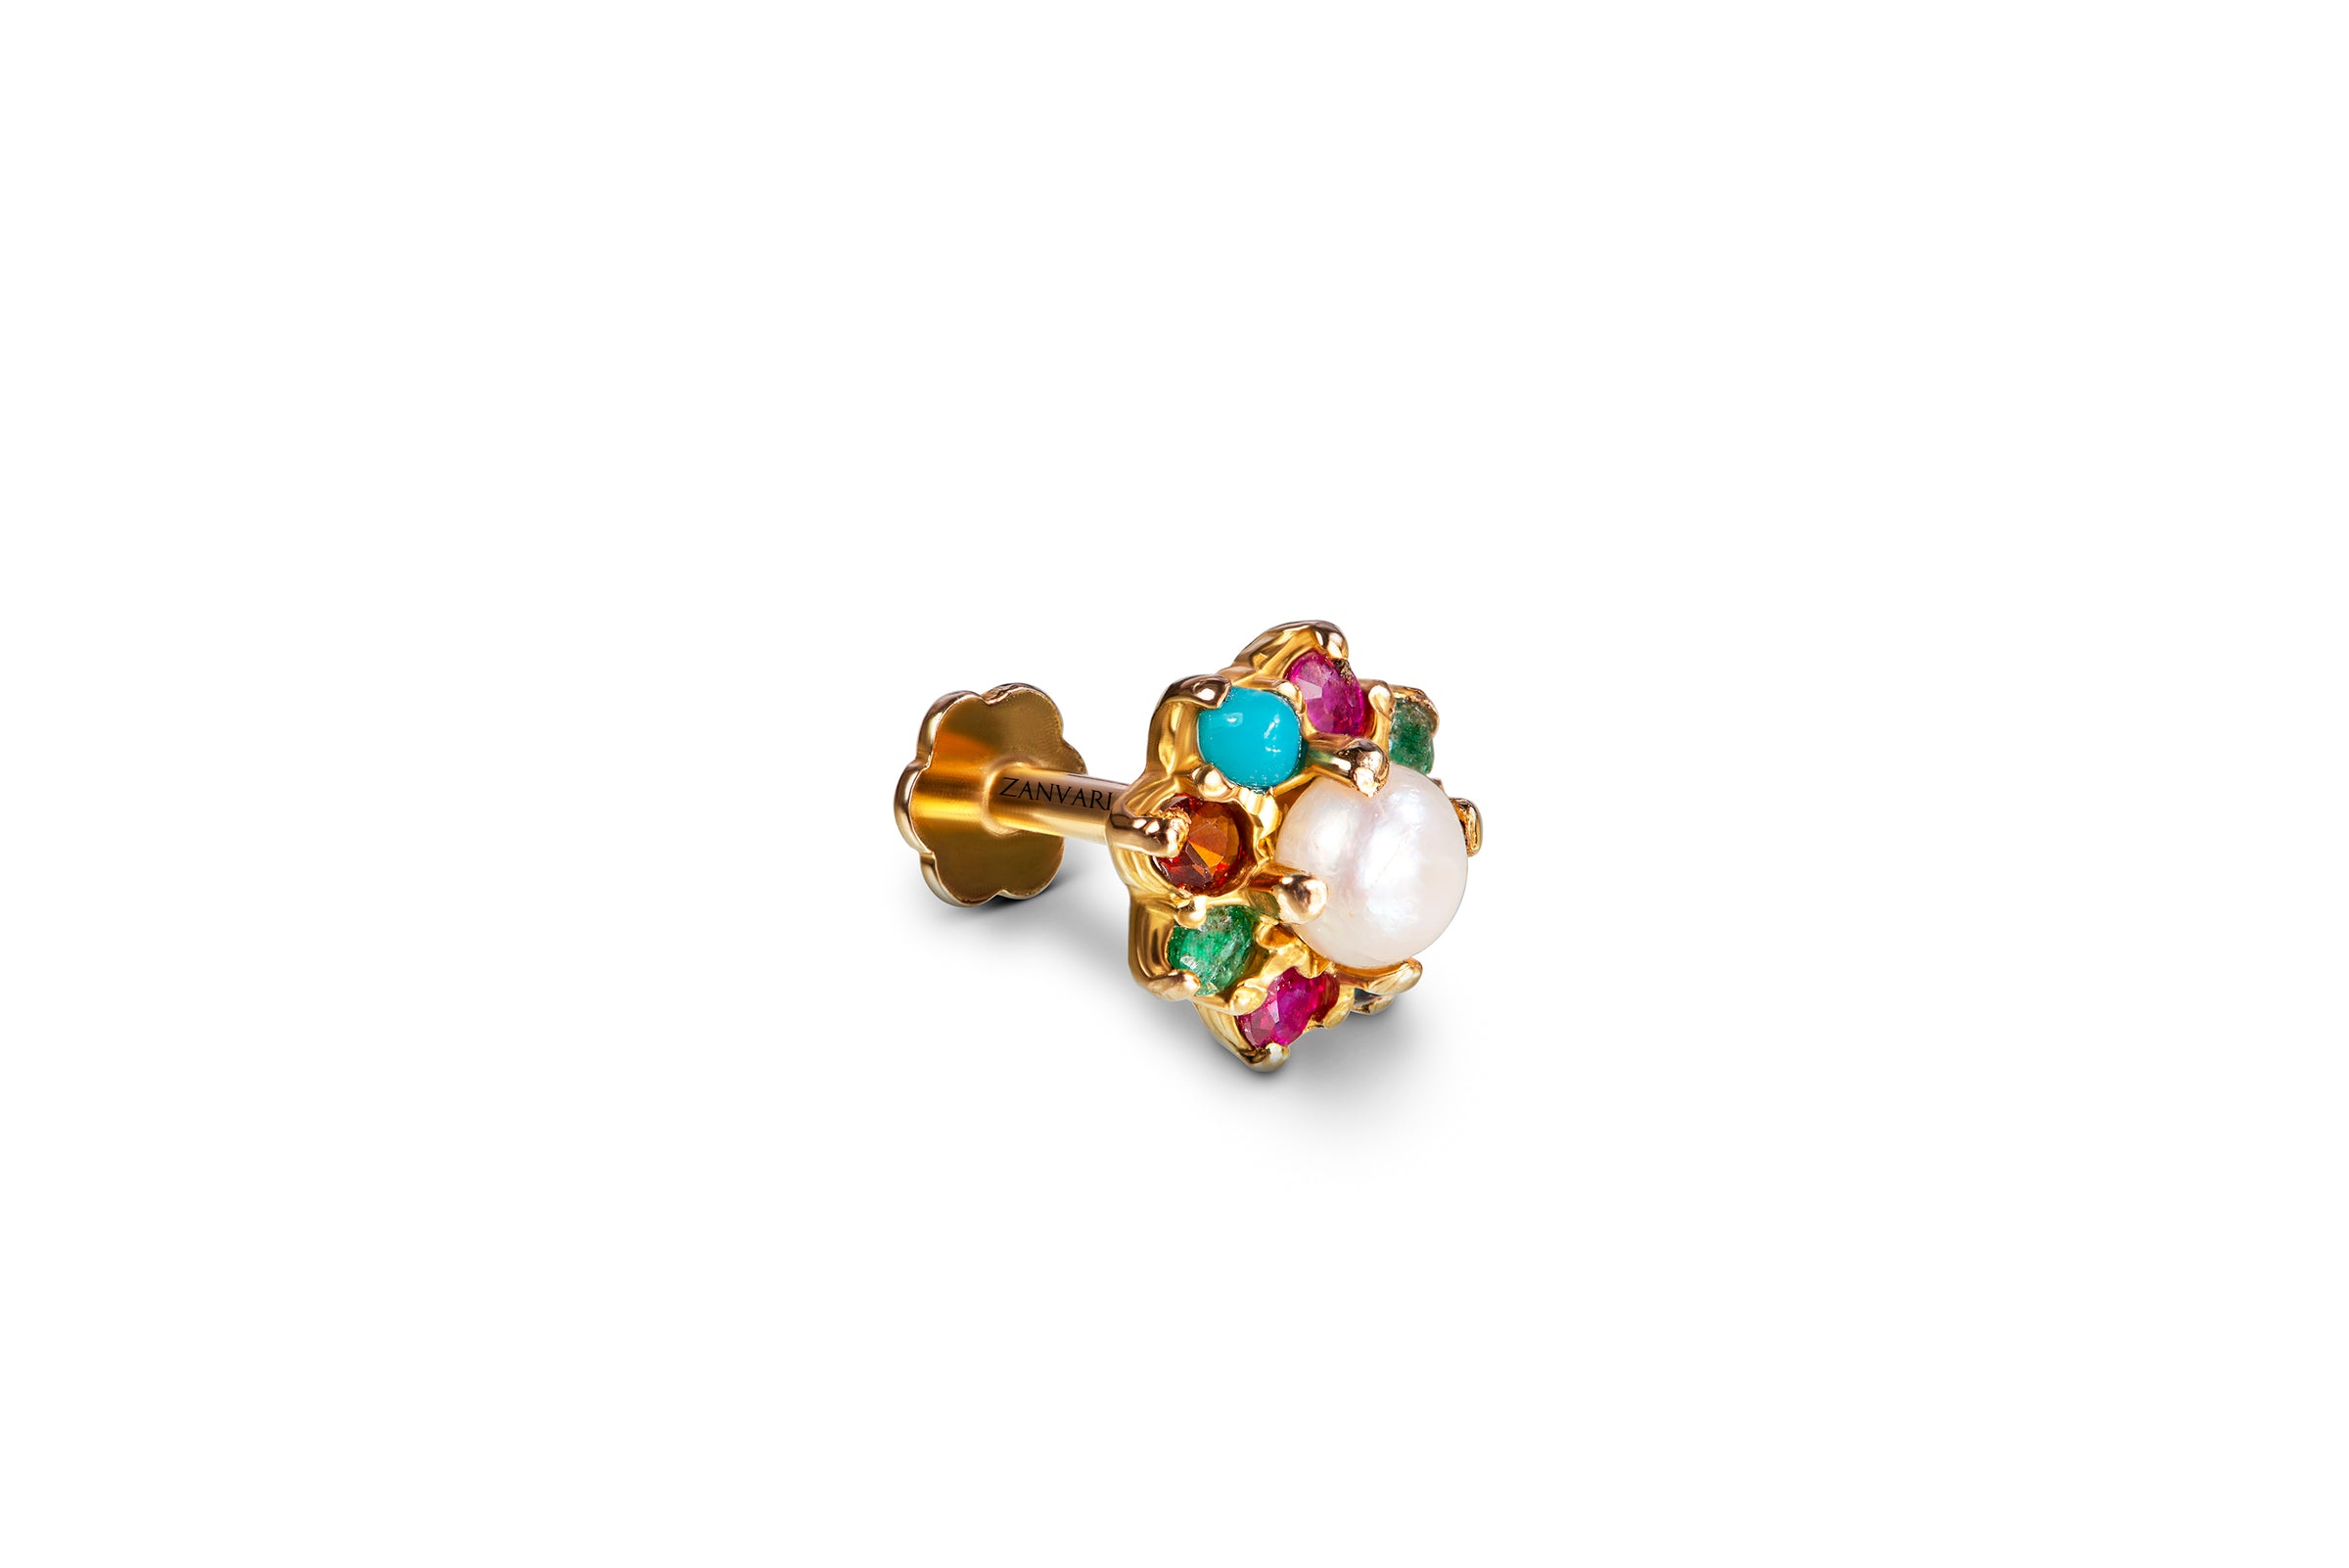 21k Gold Nauratan Nose Pin - Handcrafted with Intricate Detailing and Nine Auspicious Gems